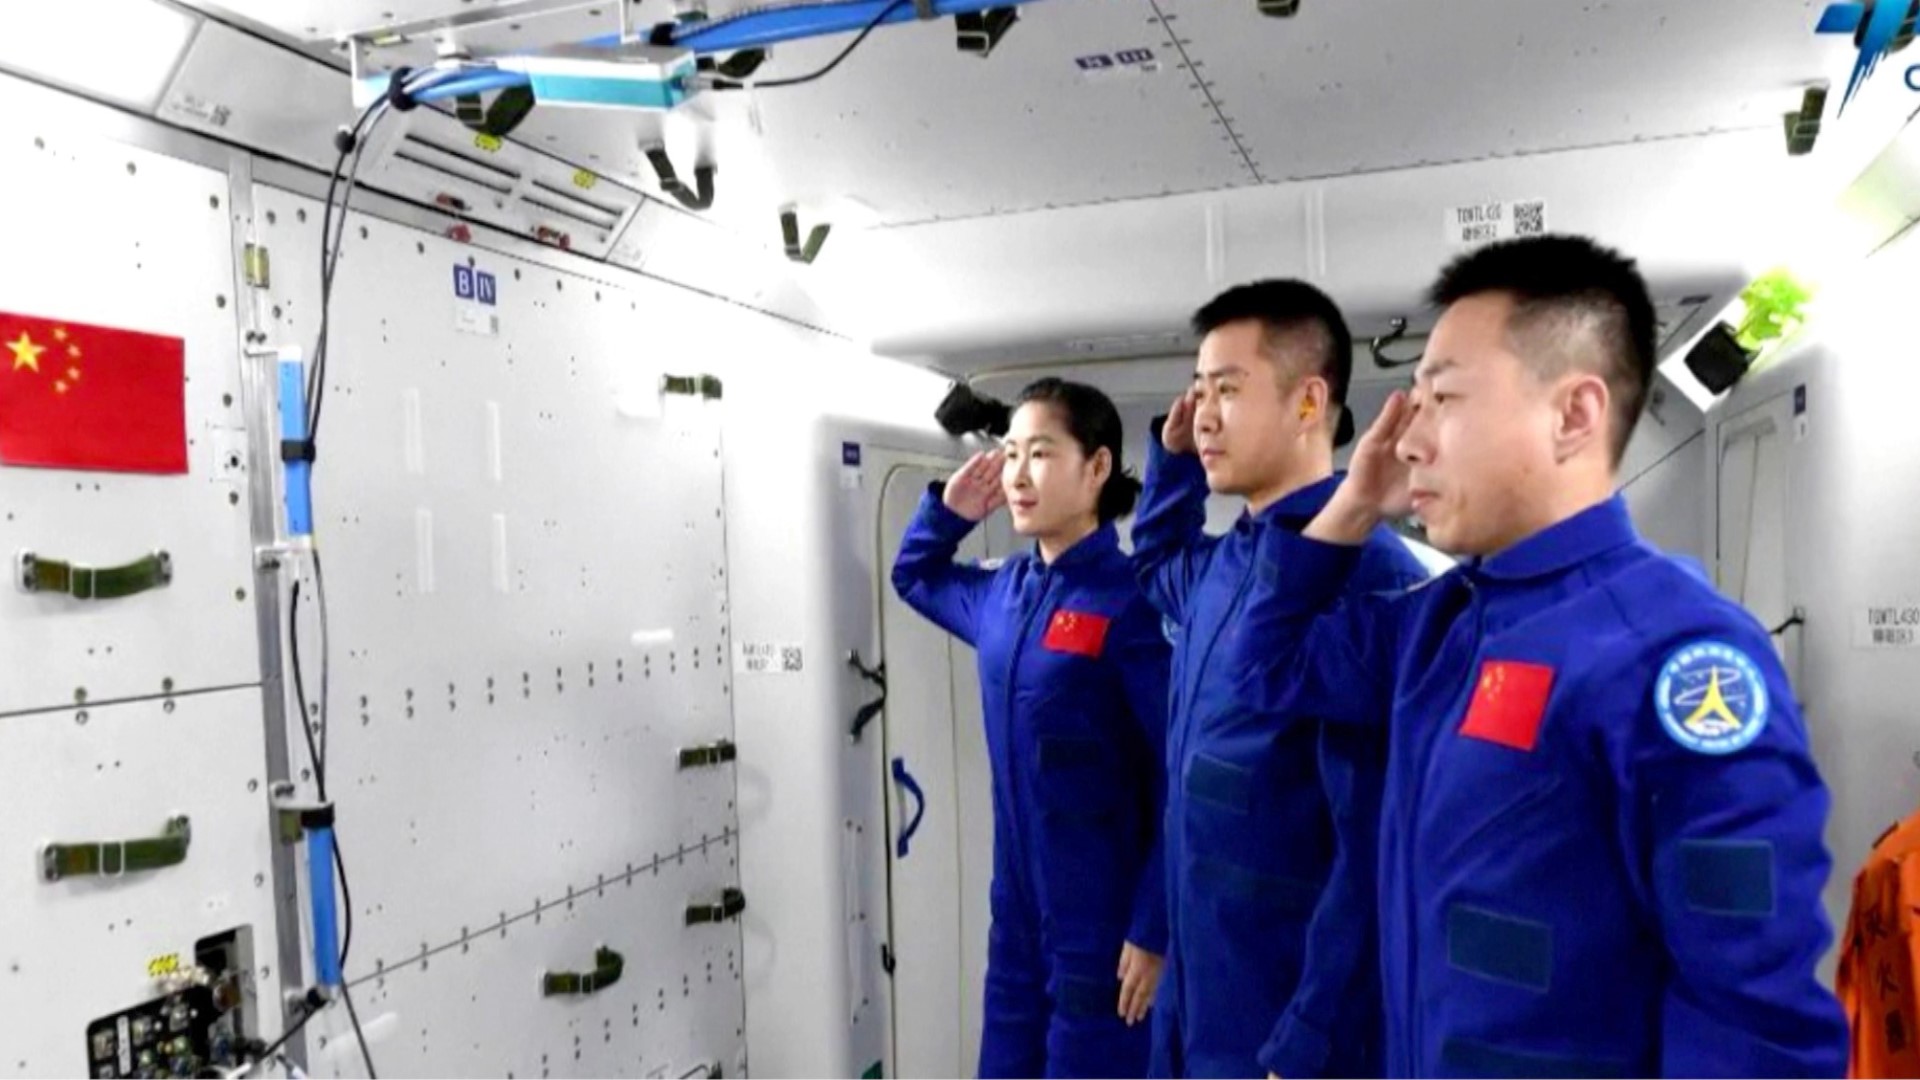 Their mission will see them spending 6 months orbiting high above Earth.